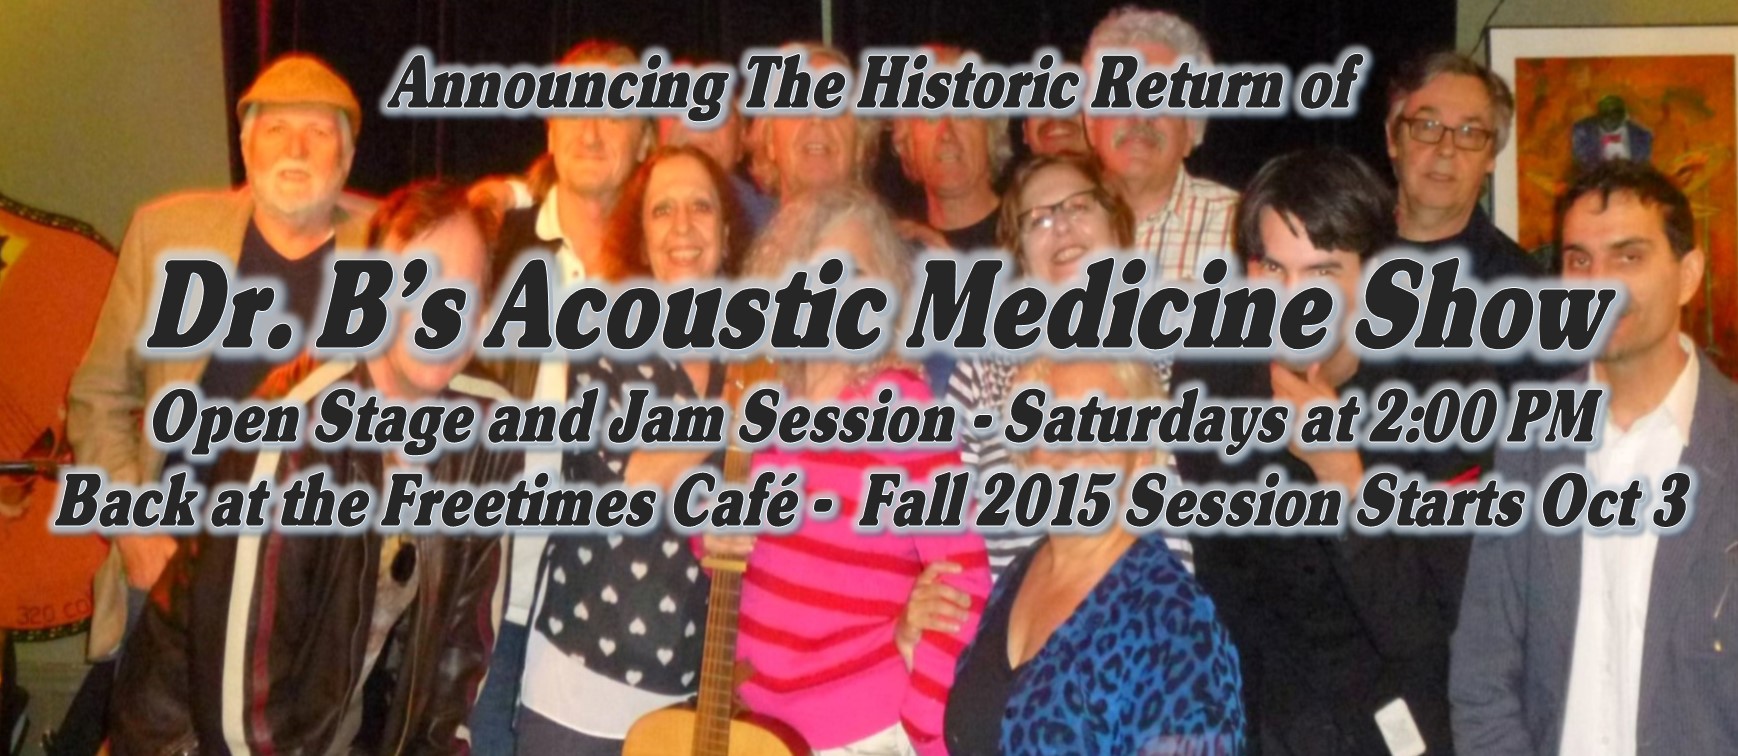 Dr. B’s Fall 2015 Session starts Oct 3 at the Freetimes Cafe